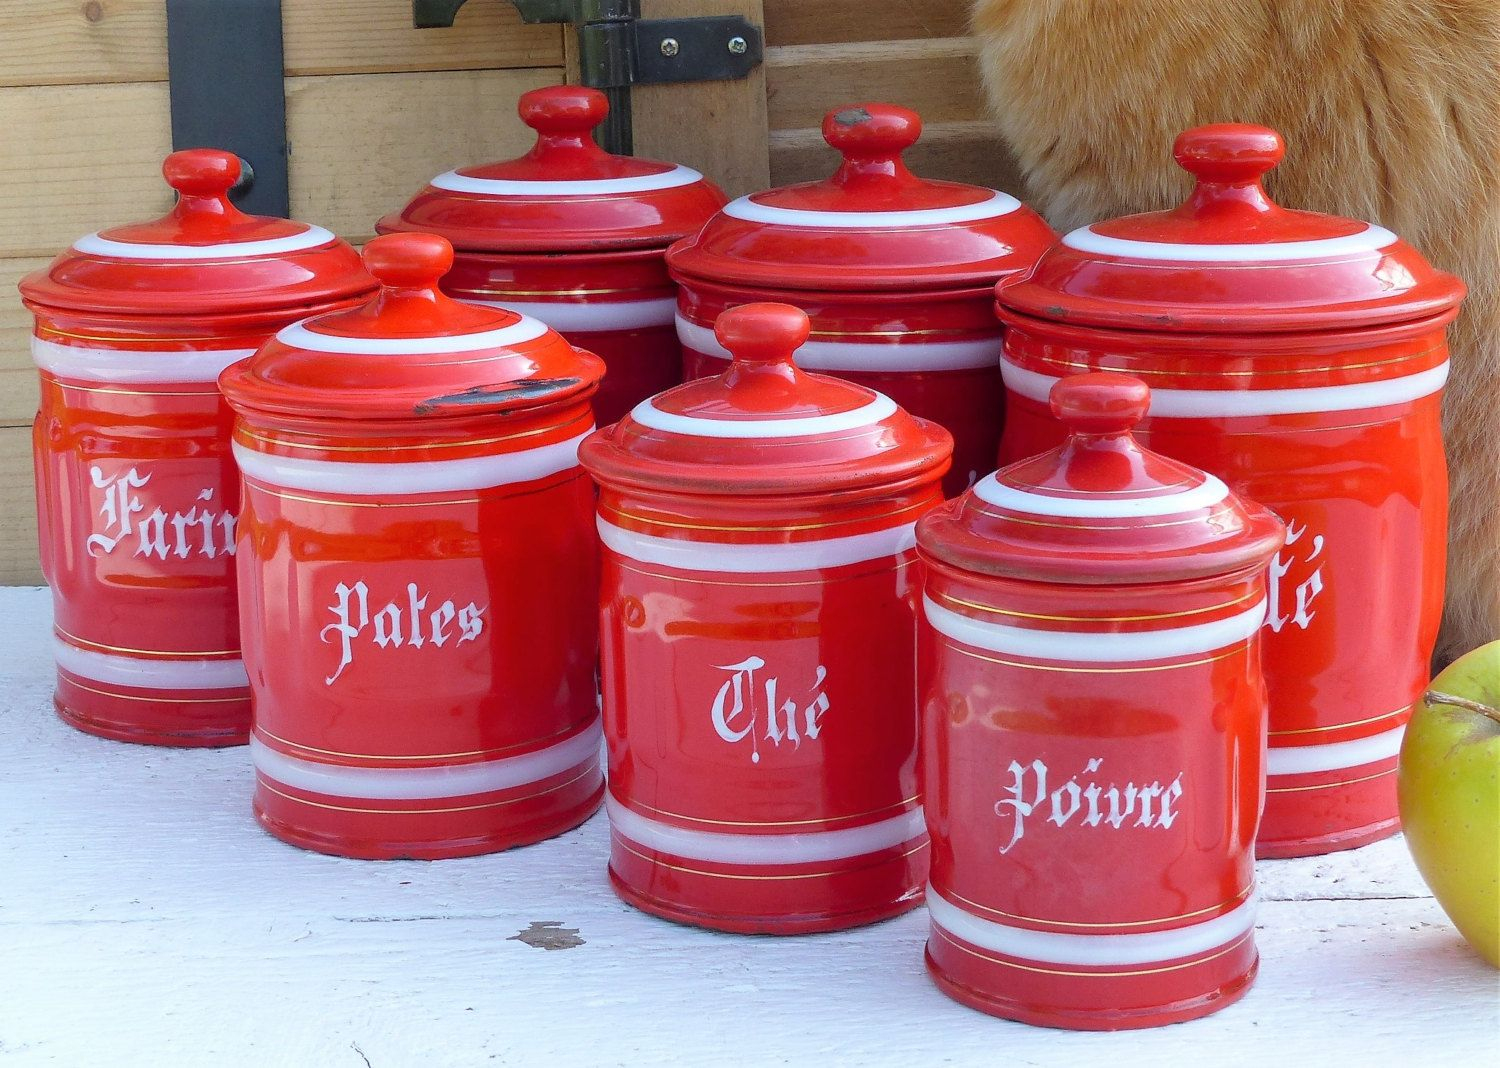 Vintage Enamelware Kitchen Canisters. (Set Of 7) Granite tout Red Kitchen Canisters 